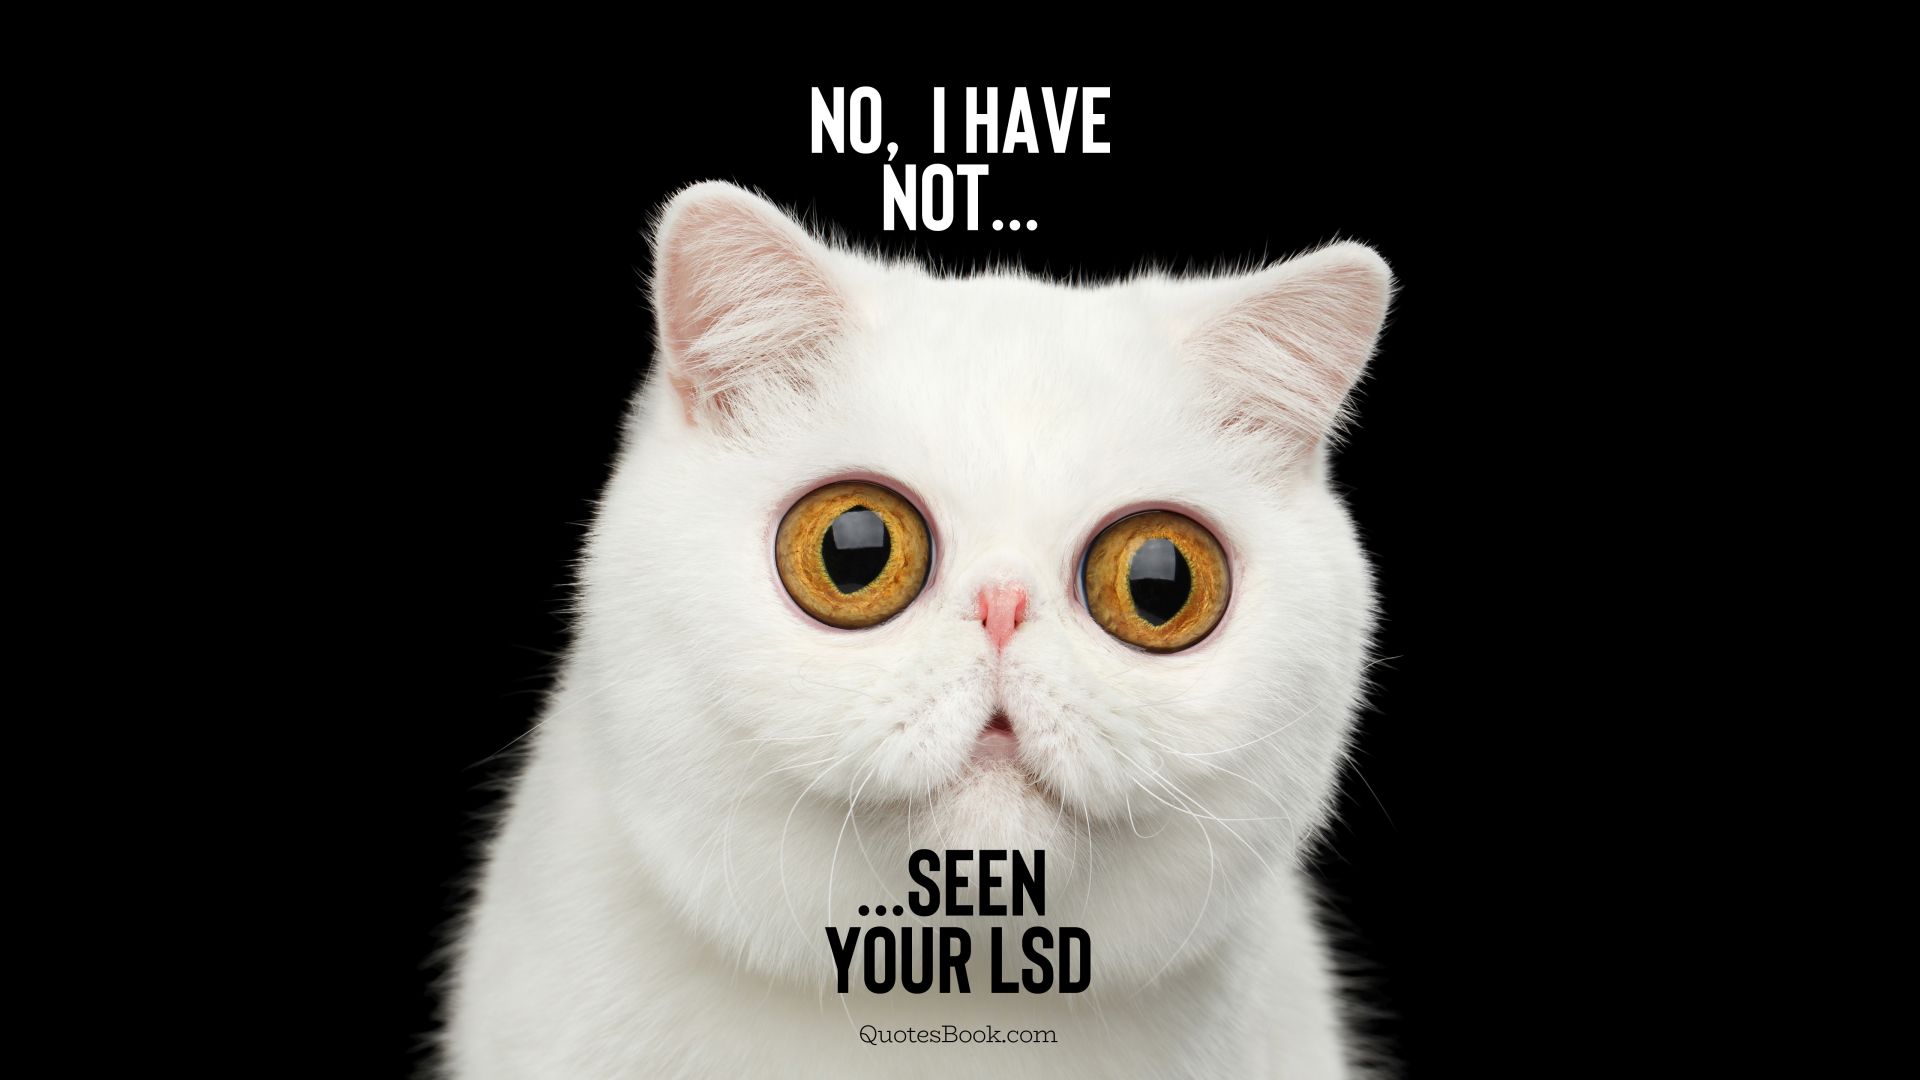 No, I haven't seen your LSD